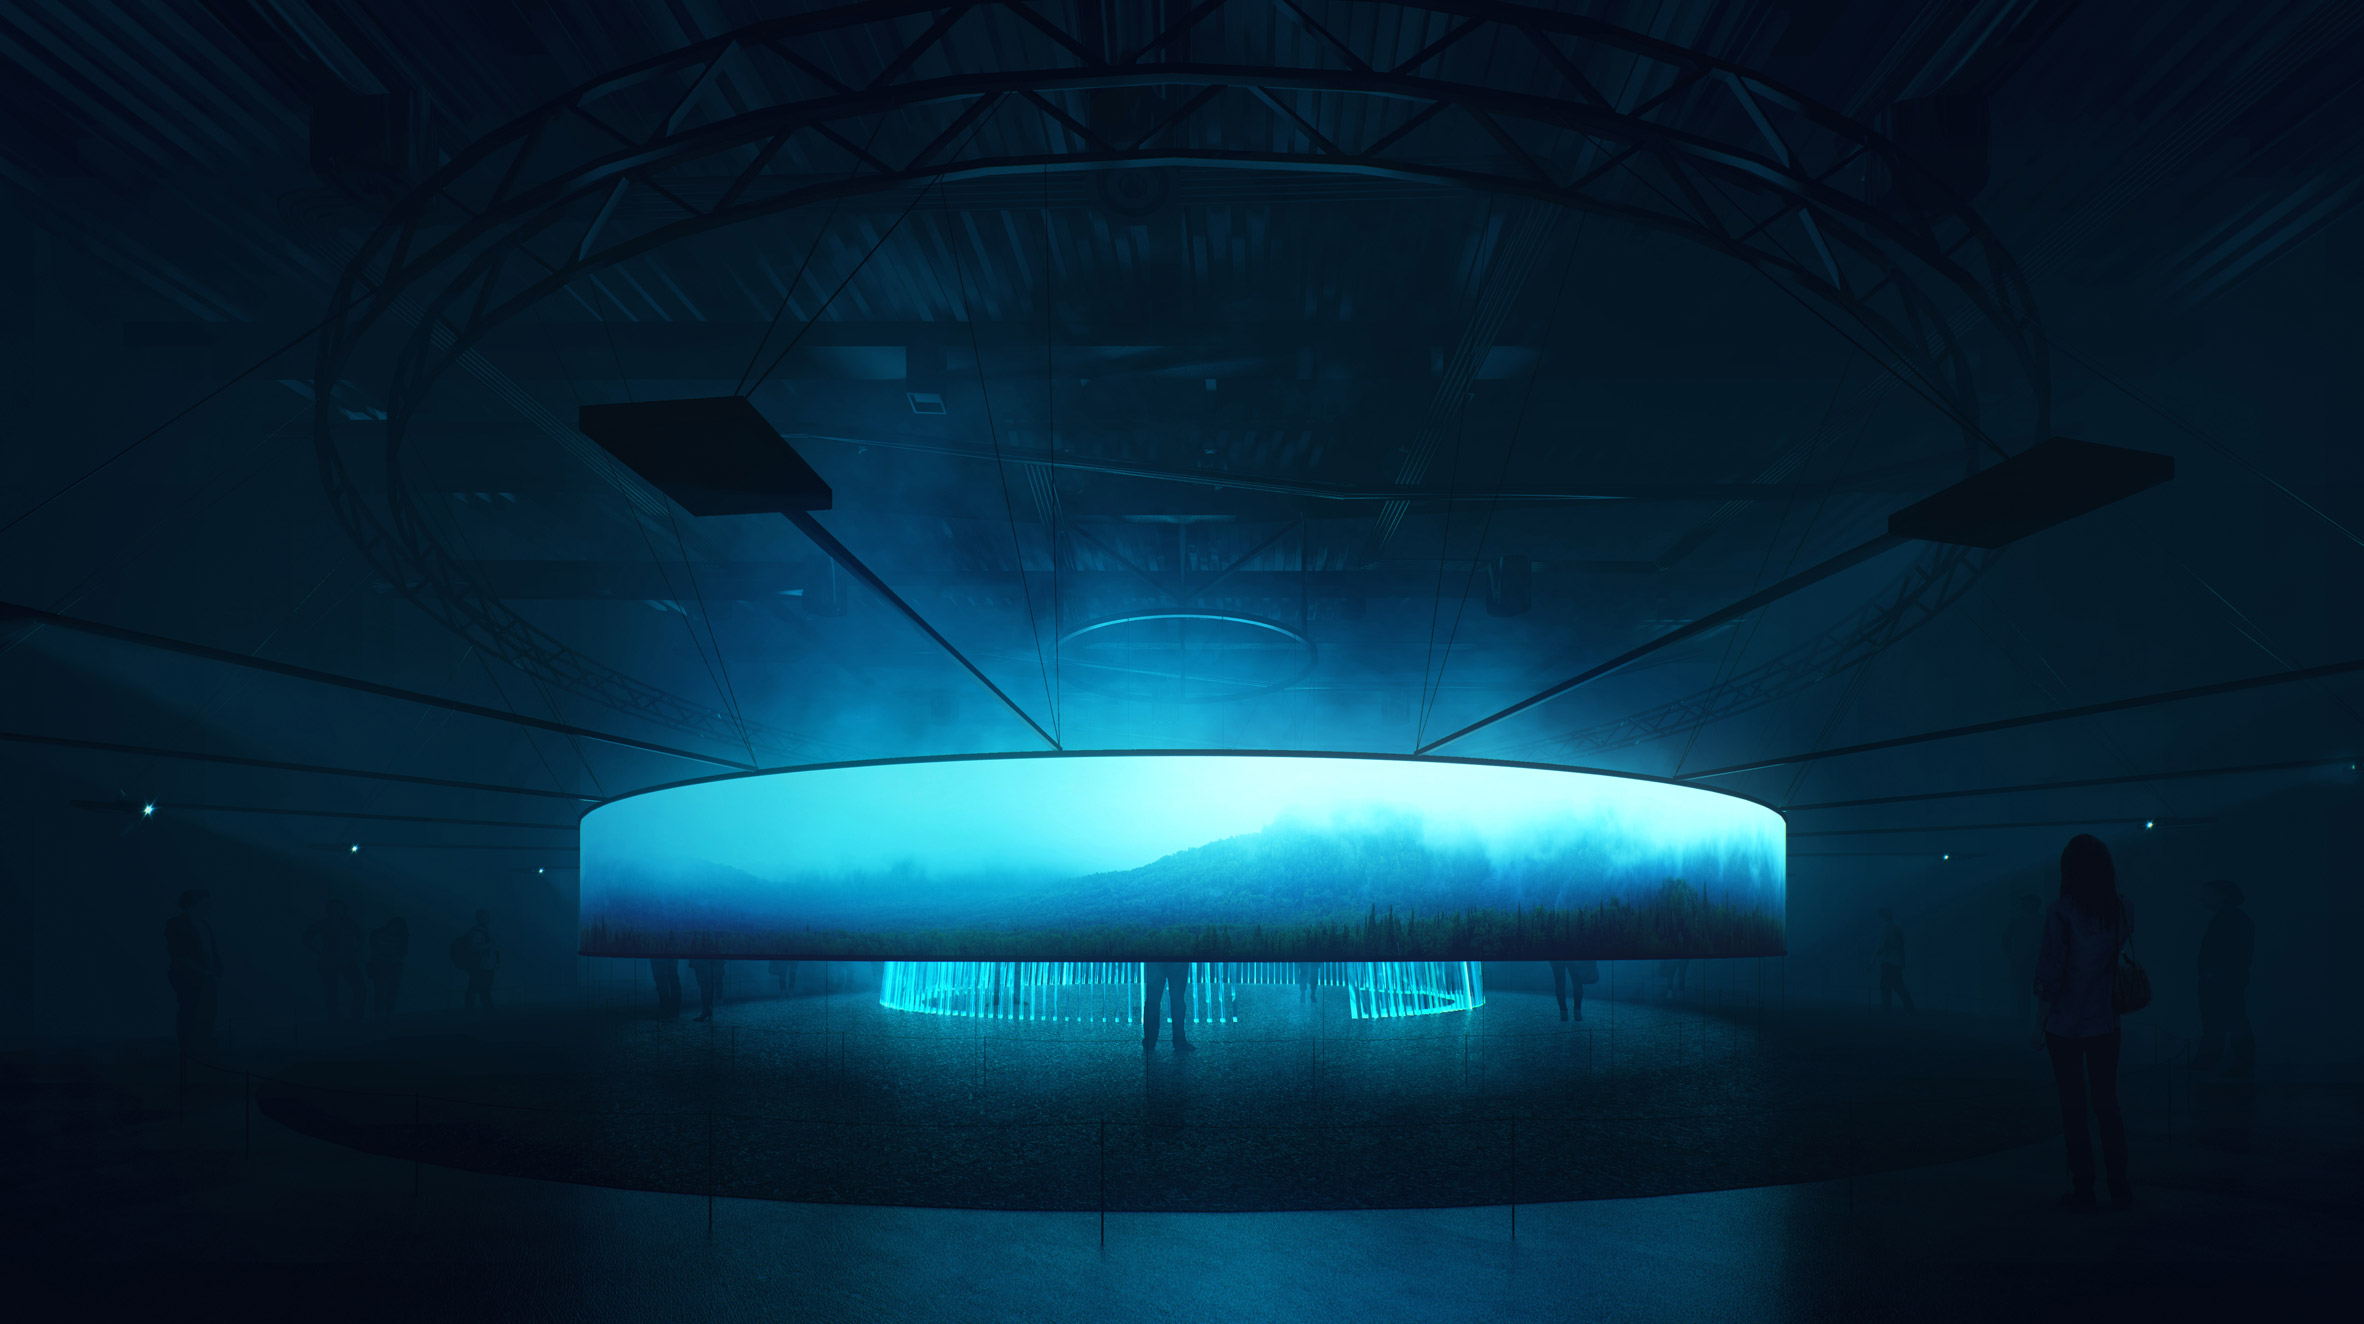 UK Pavilion for Astana Expo by Asif Khan/Brian Eno